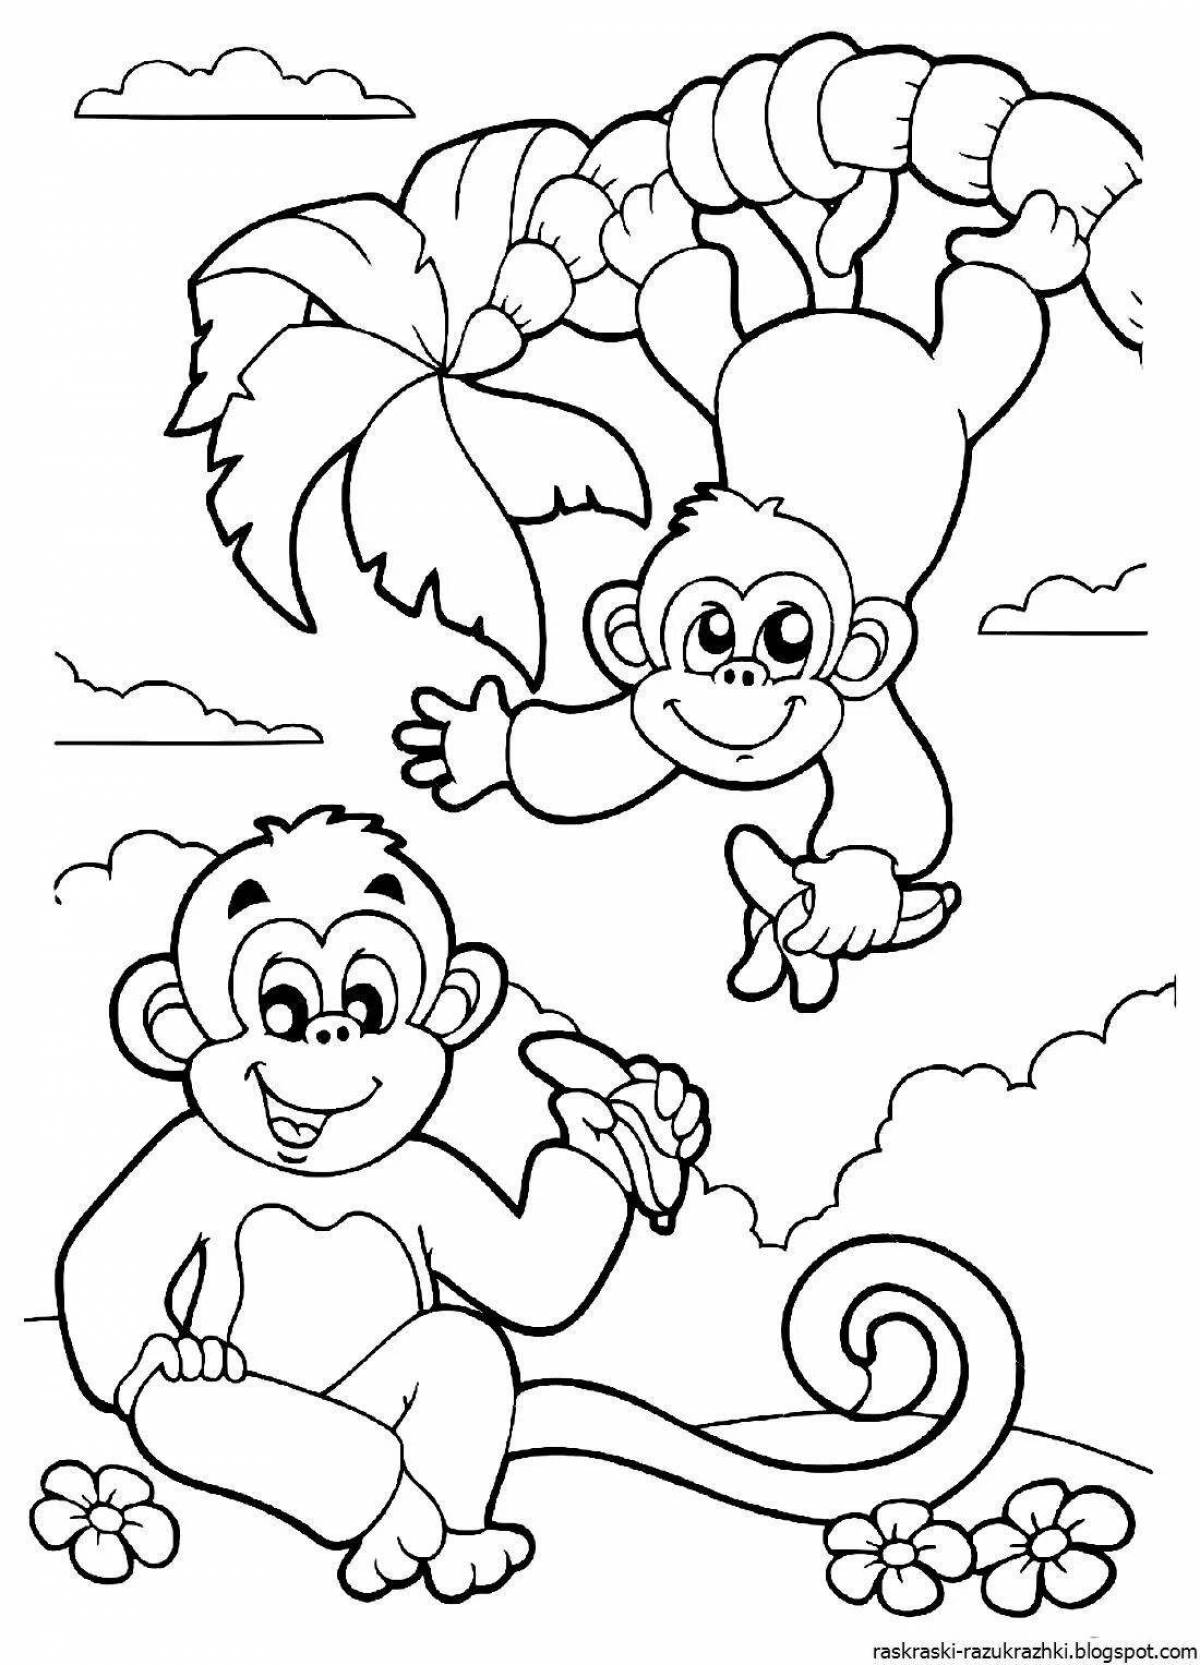 Cute monkey coloring book